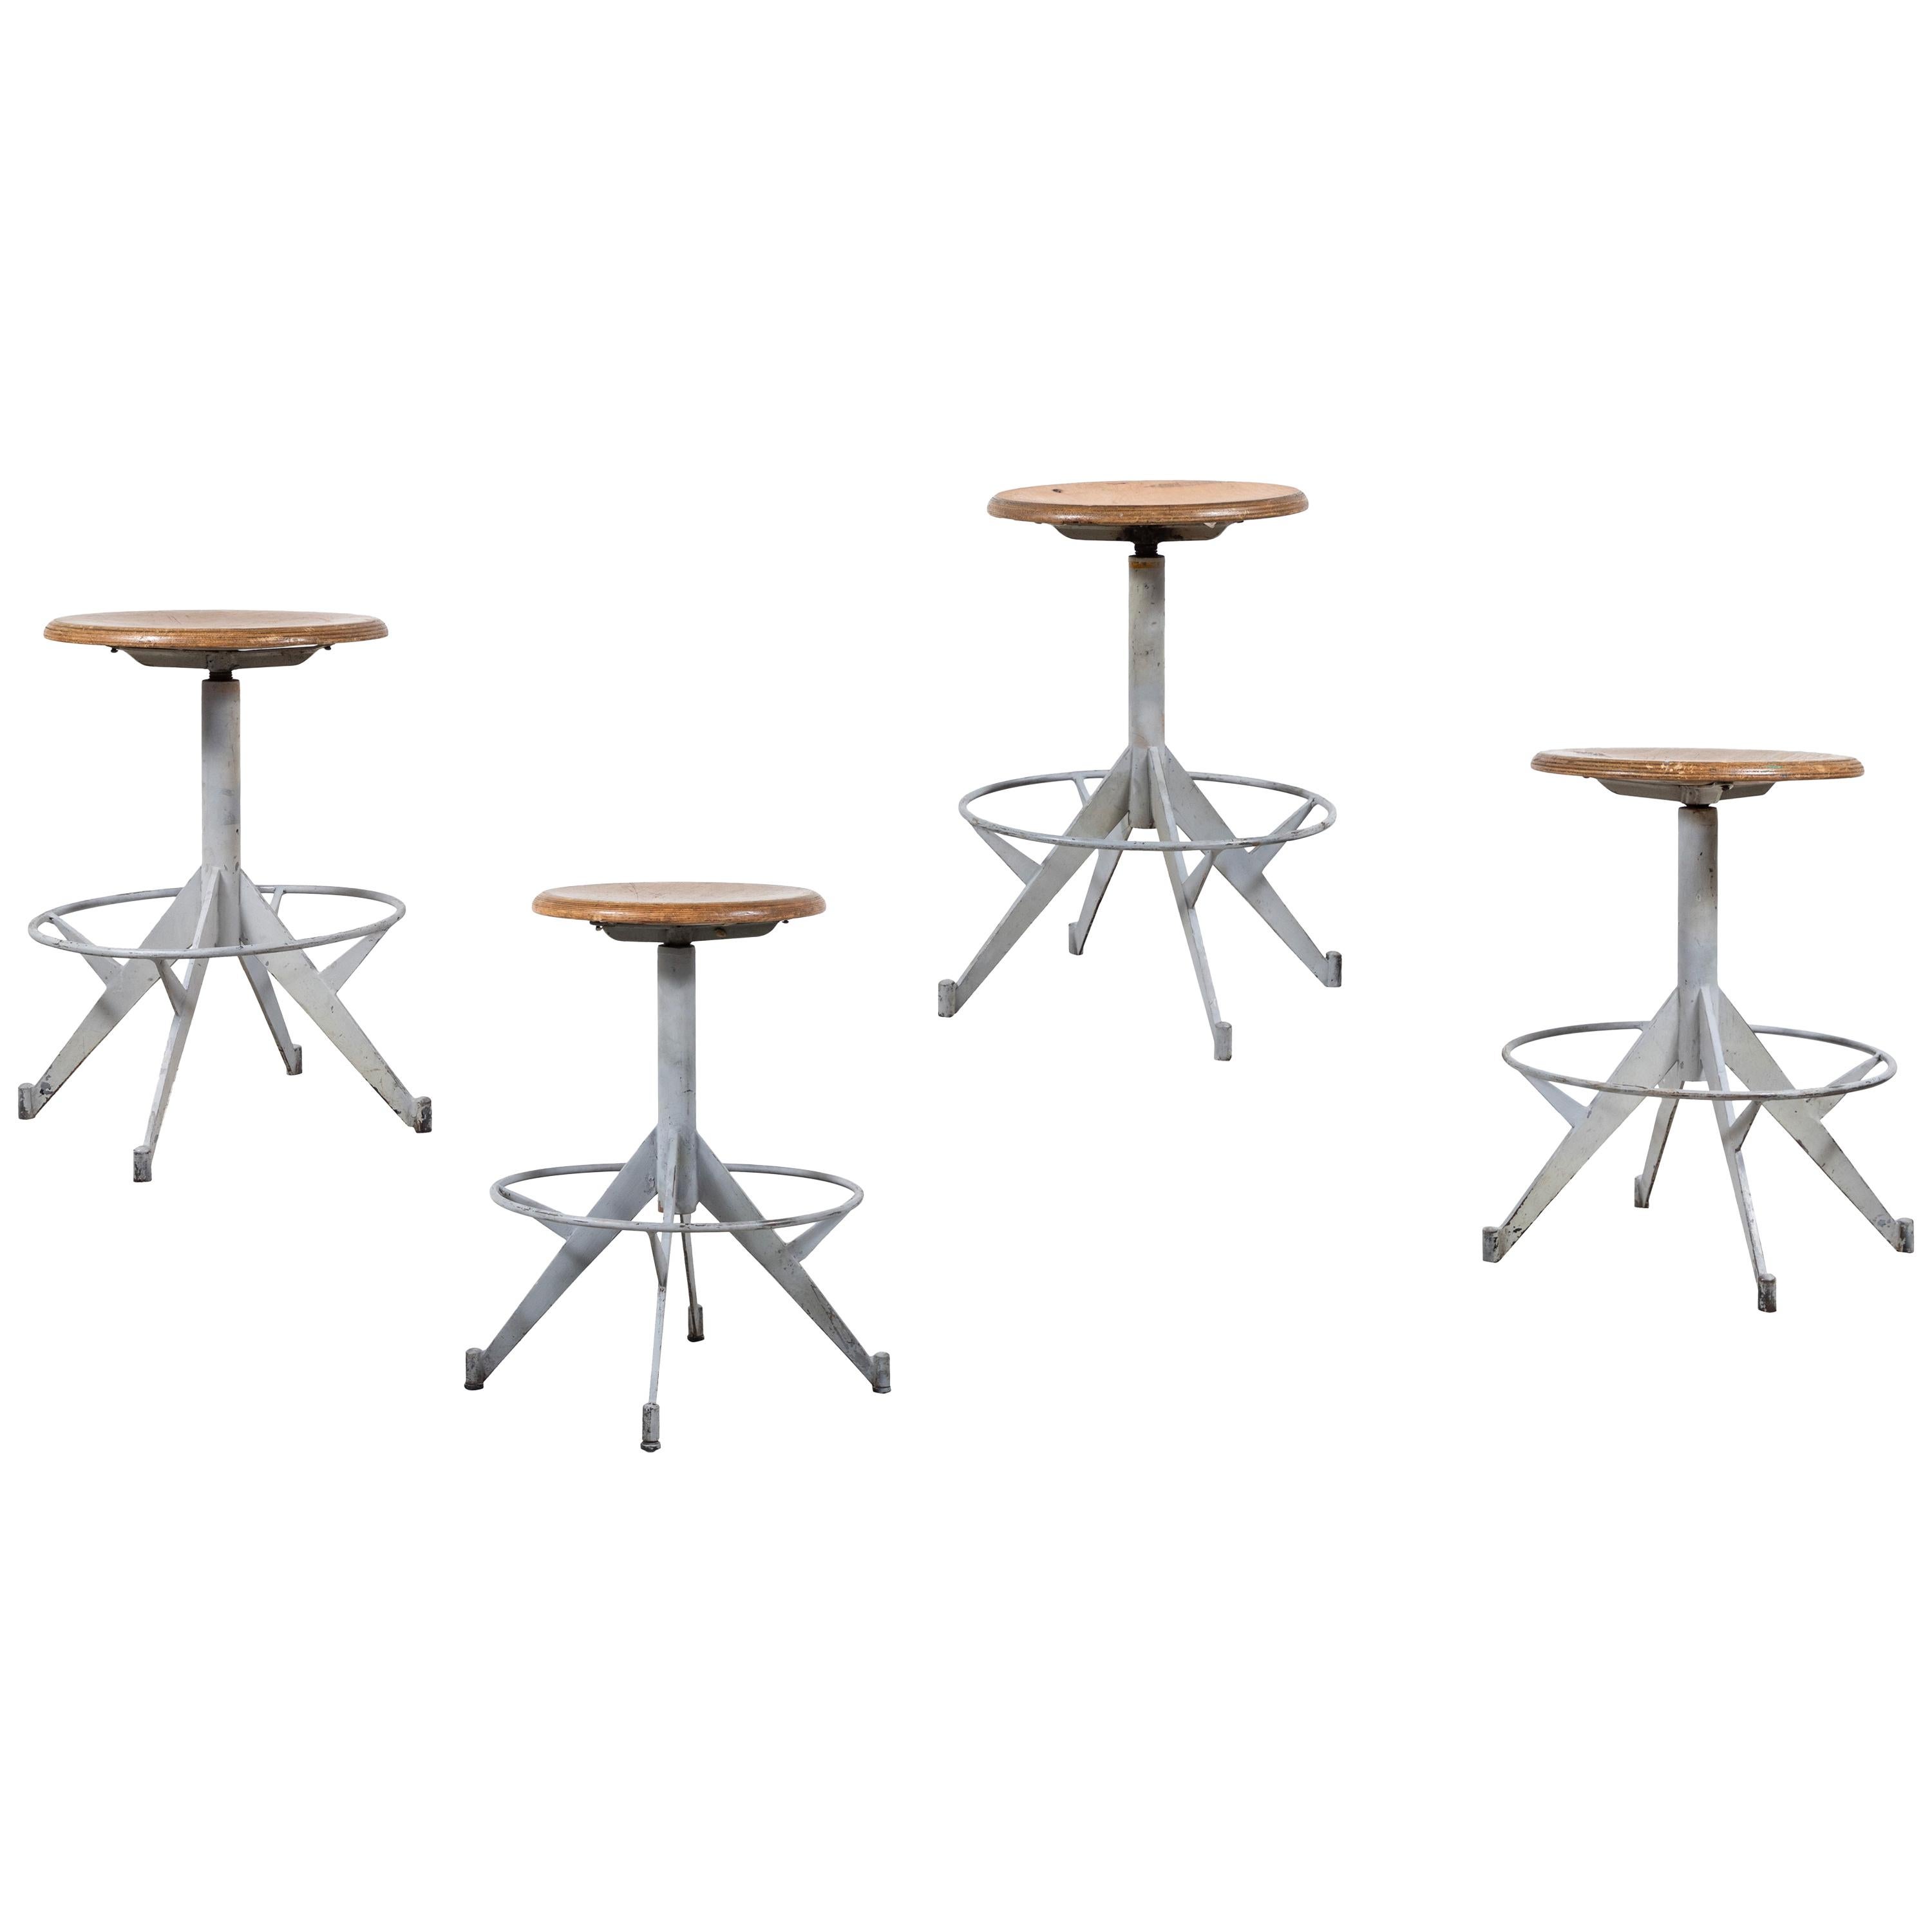 French Metal and Wood Industrial Swivel Stool